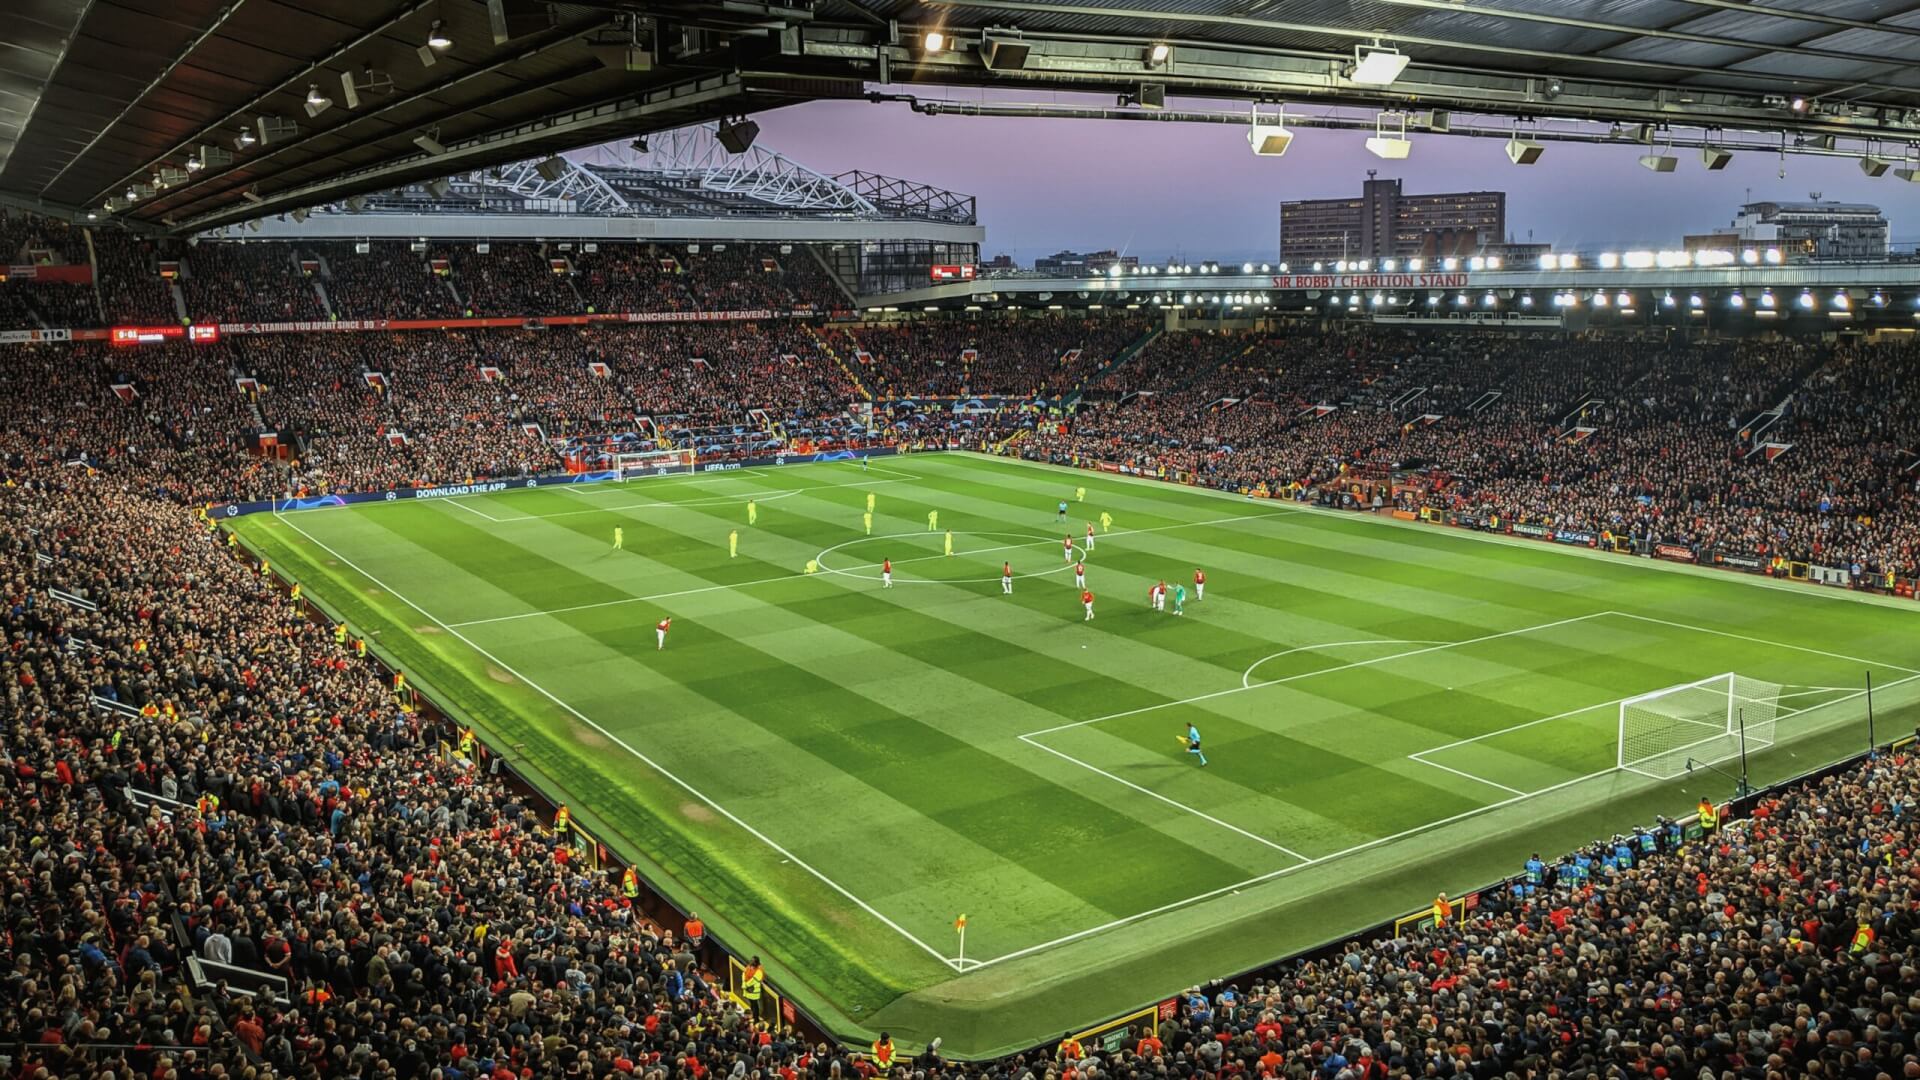 Football match being played at Old Trafford